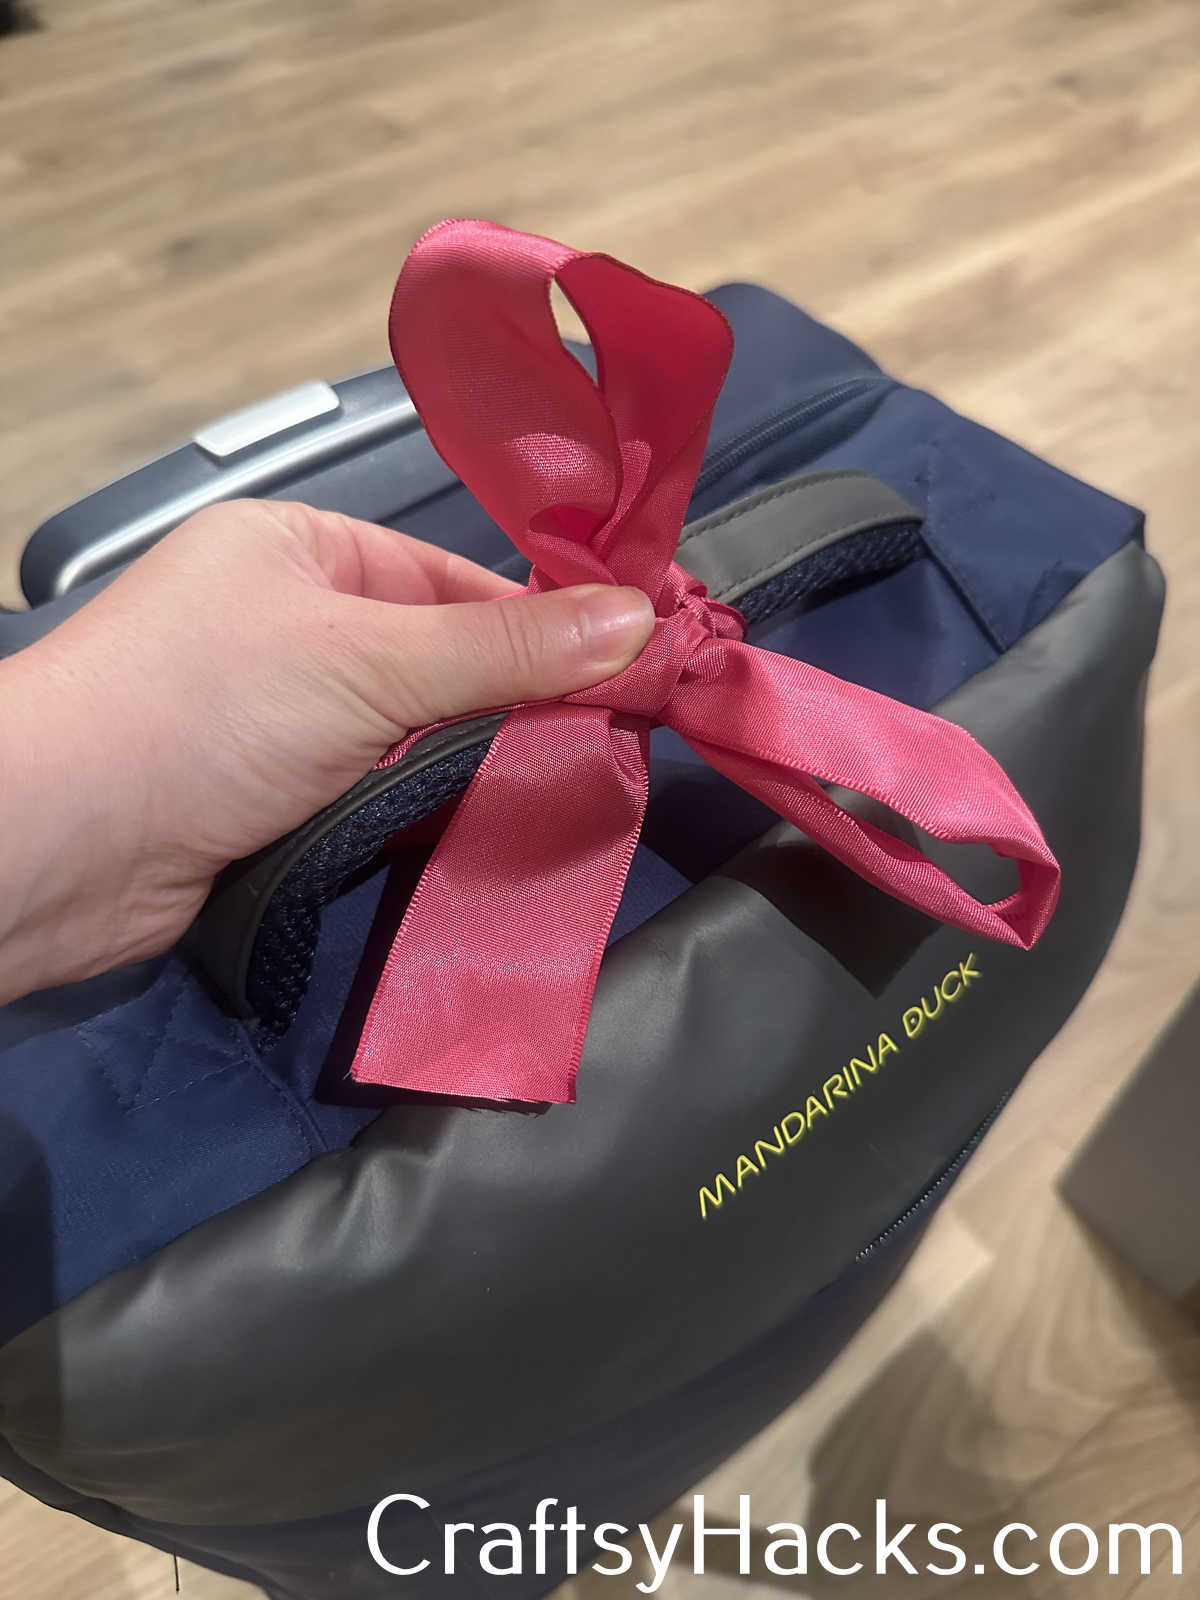 Tie a Ribbon to the Suitcase to Recognise It